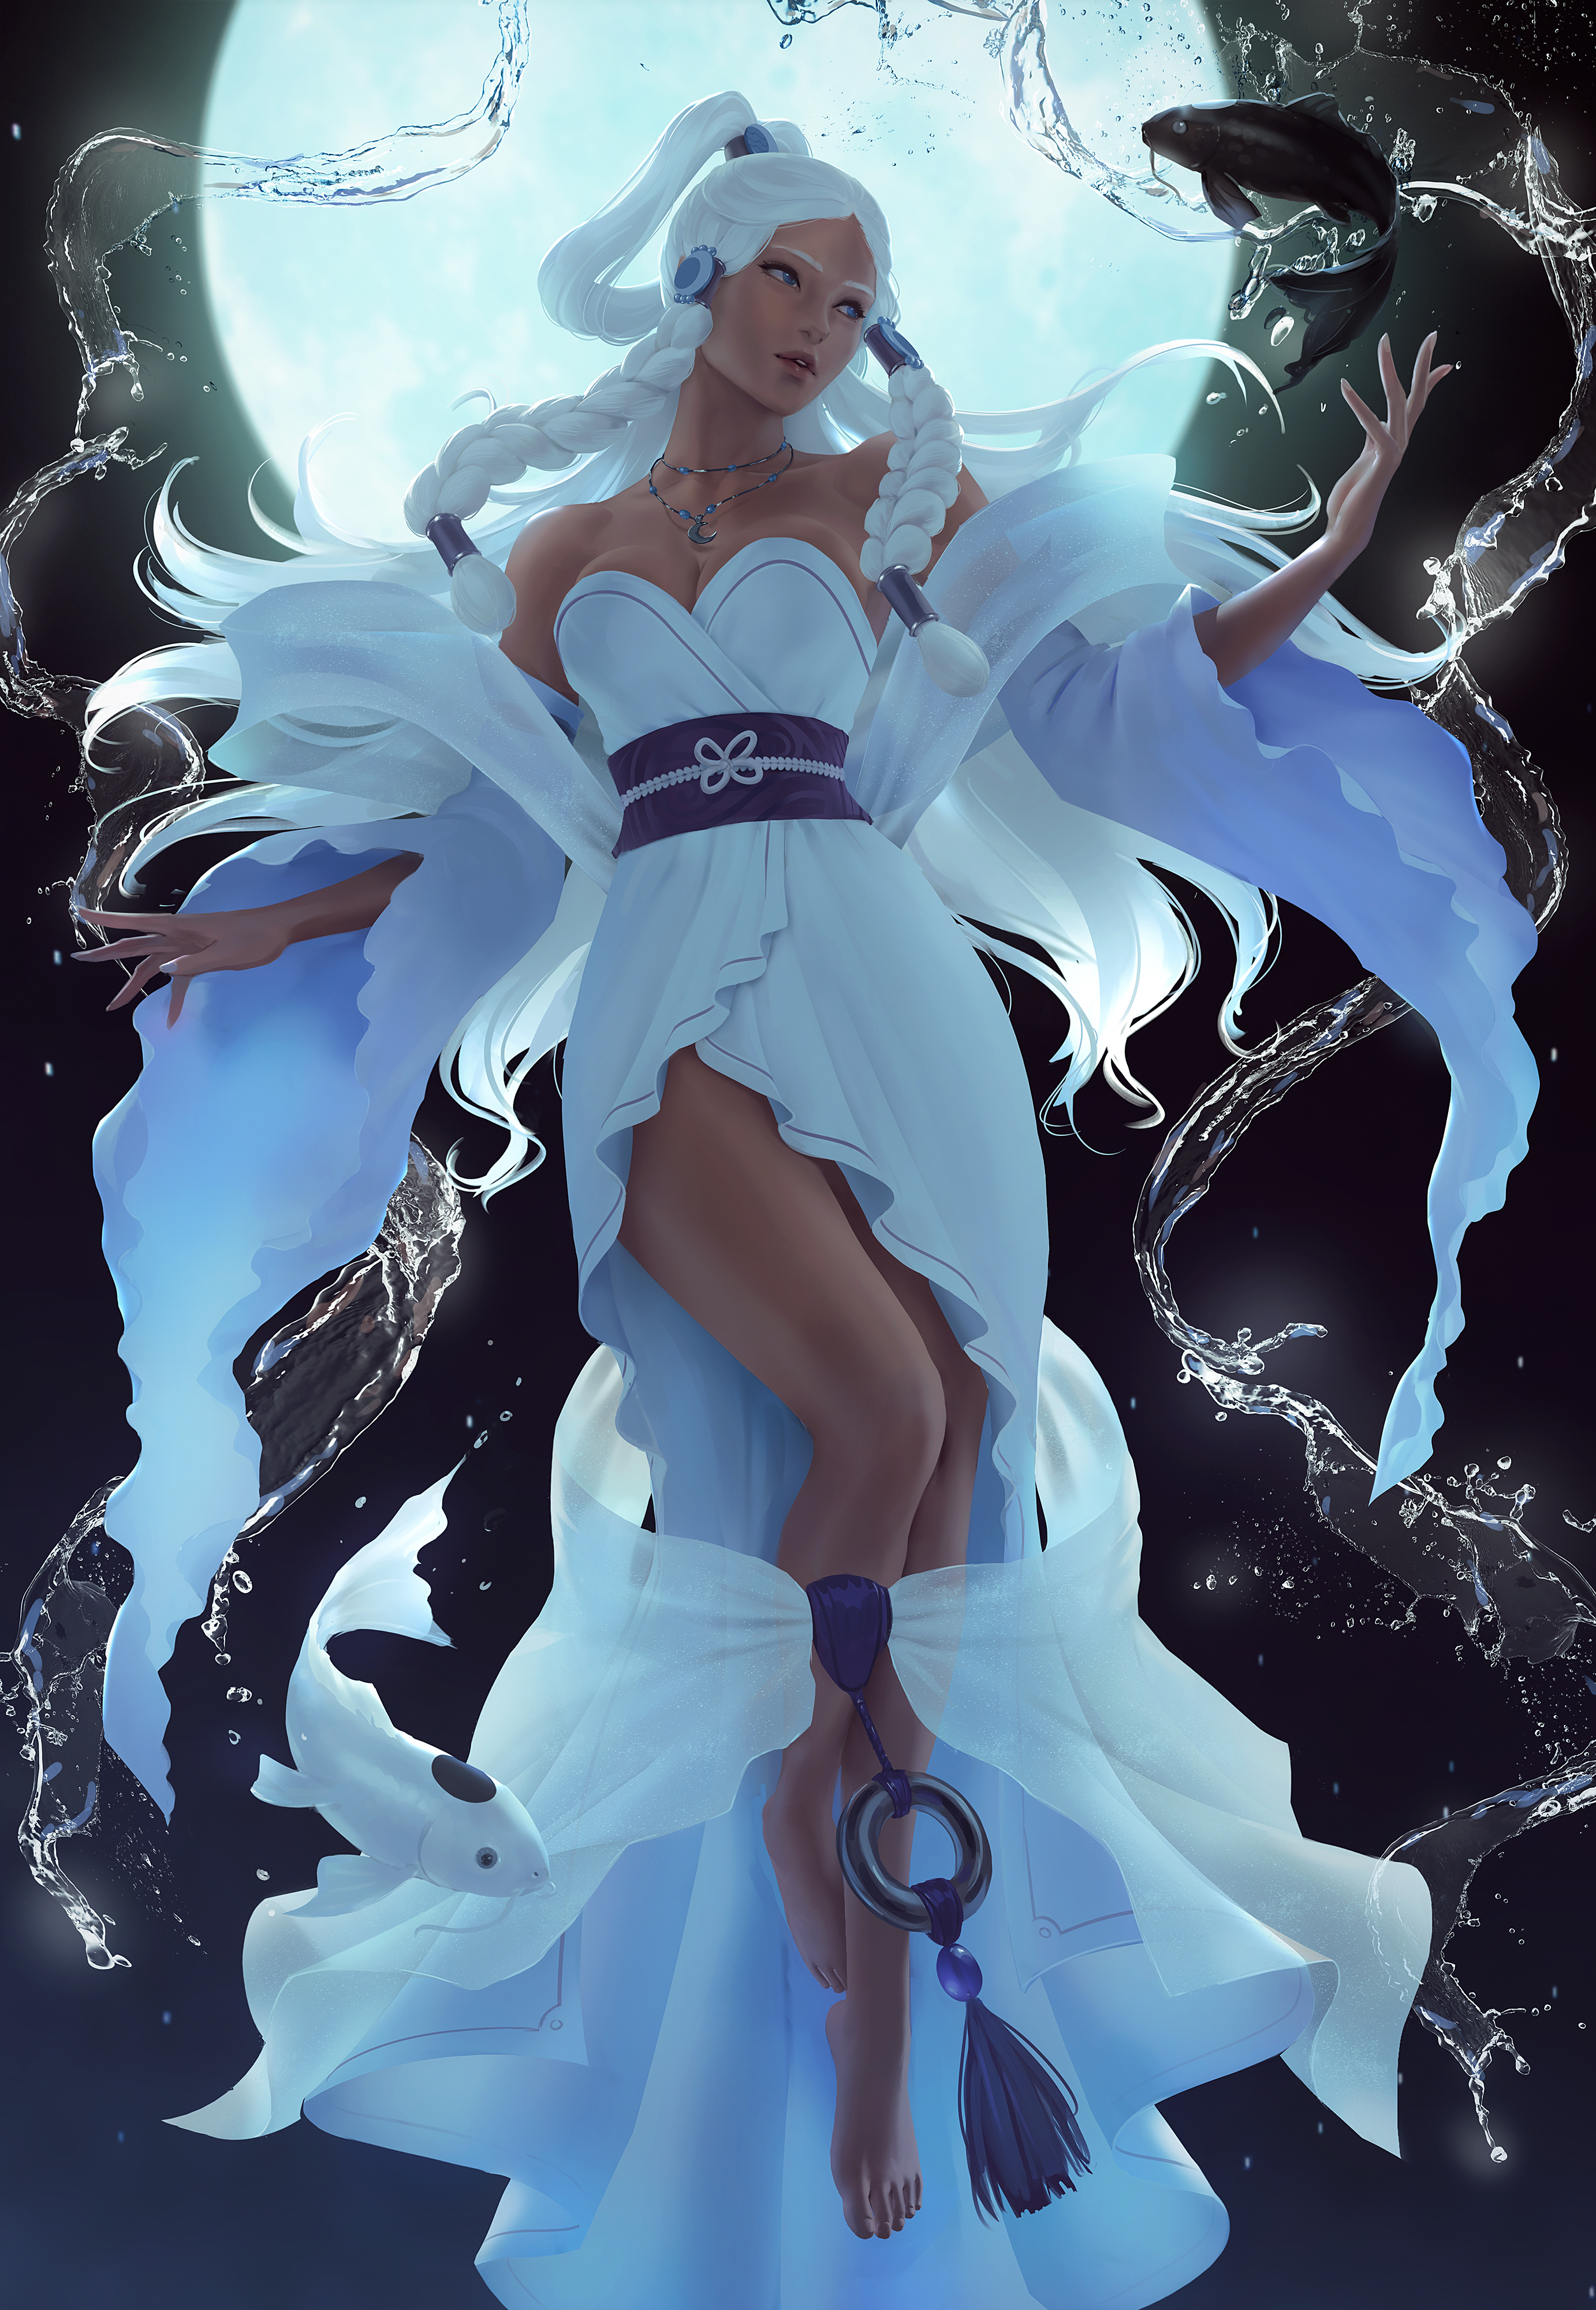 Princess Yue Avatar The Last Airbender Fictional Character Animated Series Moonlight Braids White Ha 2764x4000